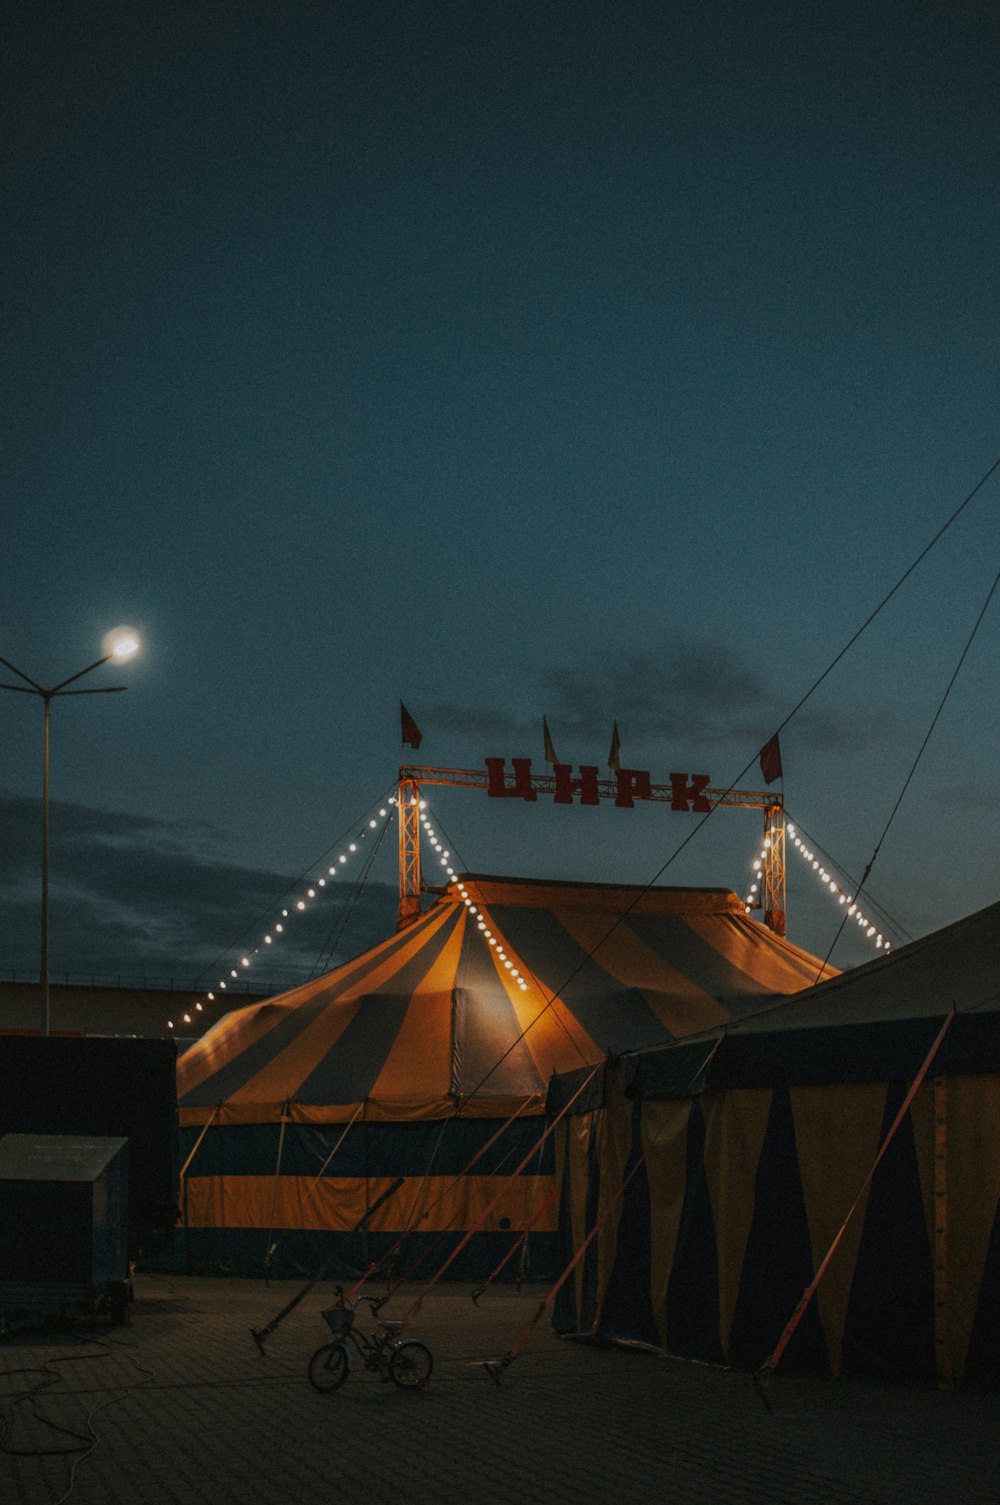 a circus tent lit up at night with a bicycle parked in front of it